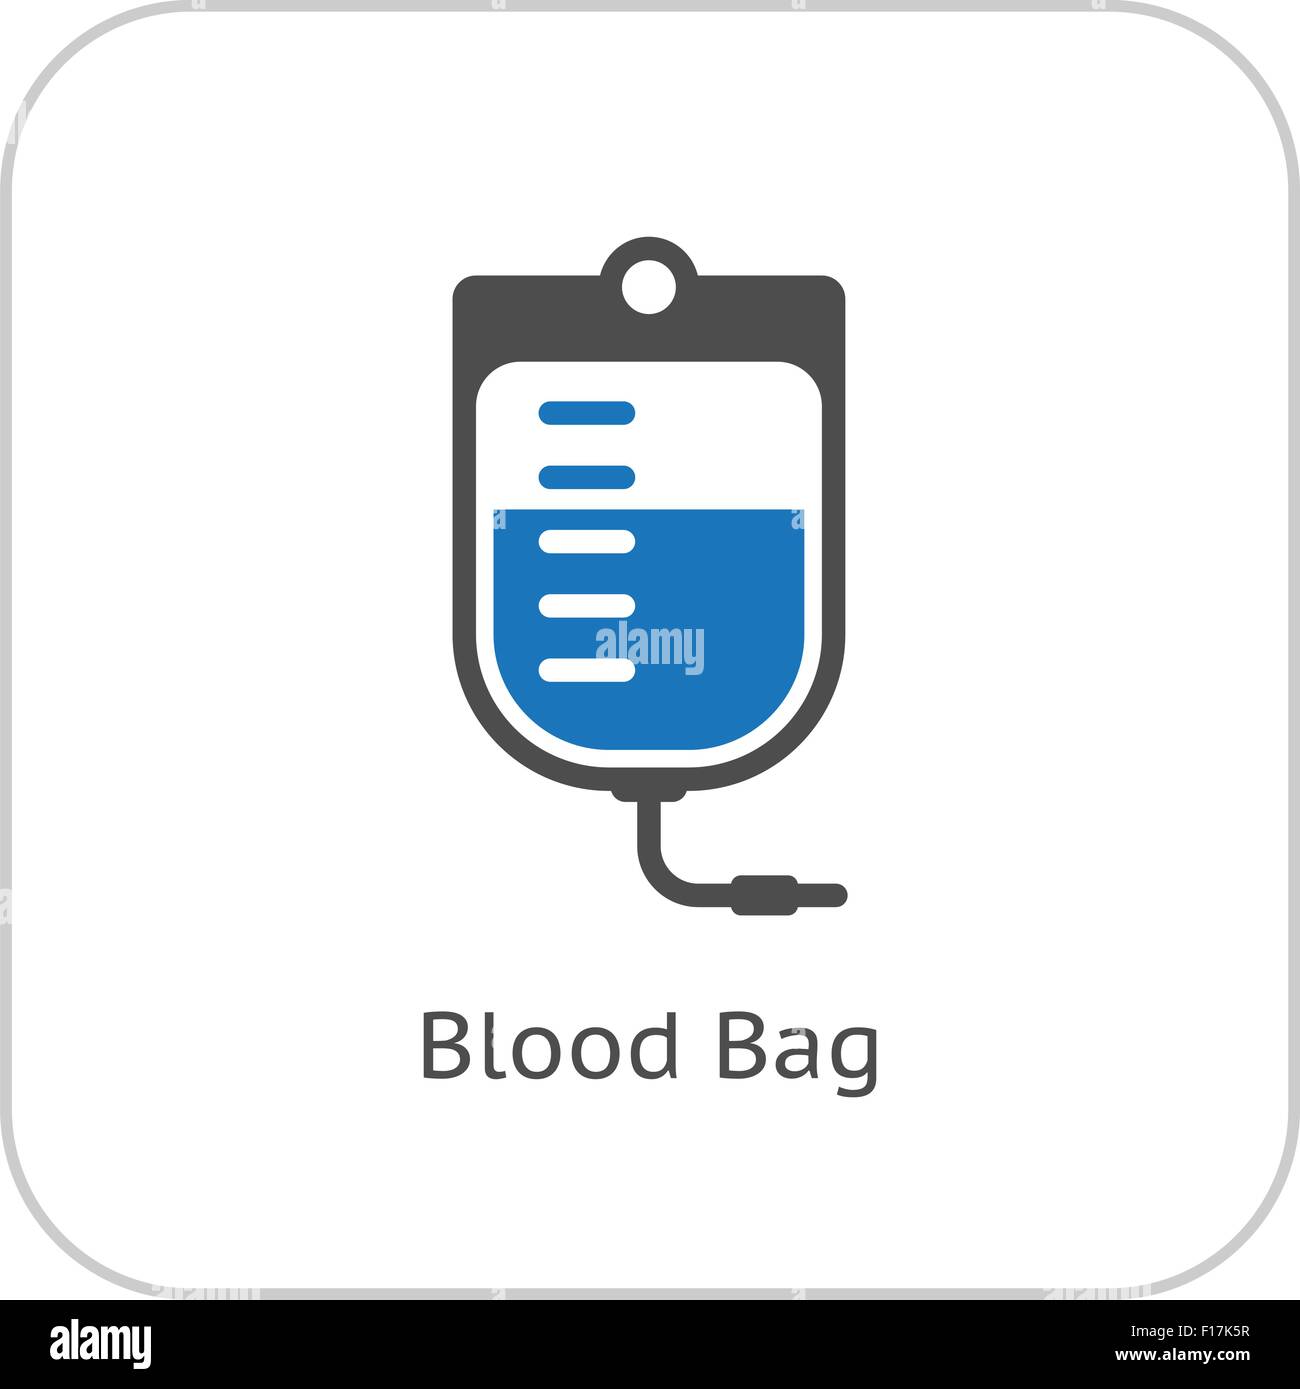 Blood Bag and Medical Services Icon. Flat Design. Stock Vector